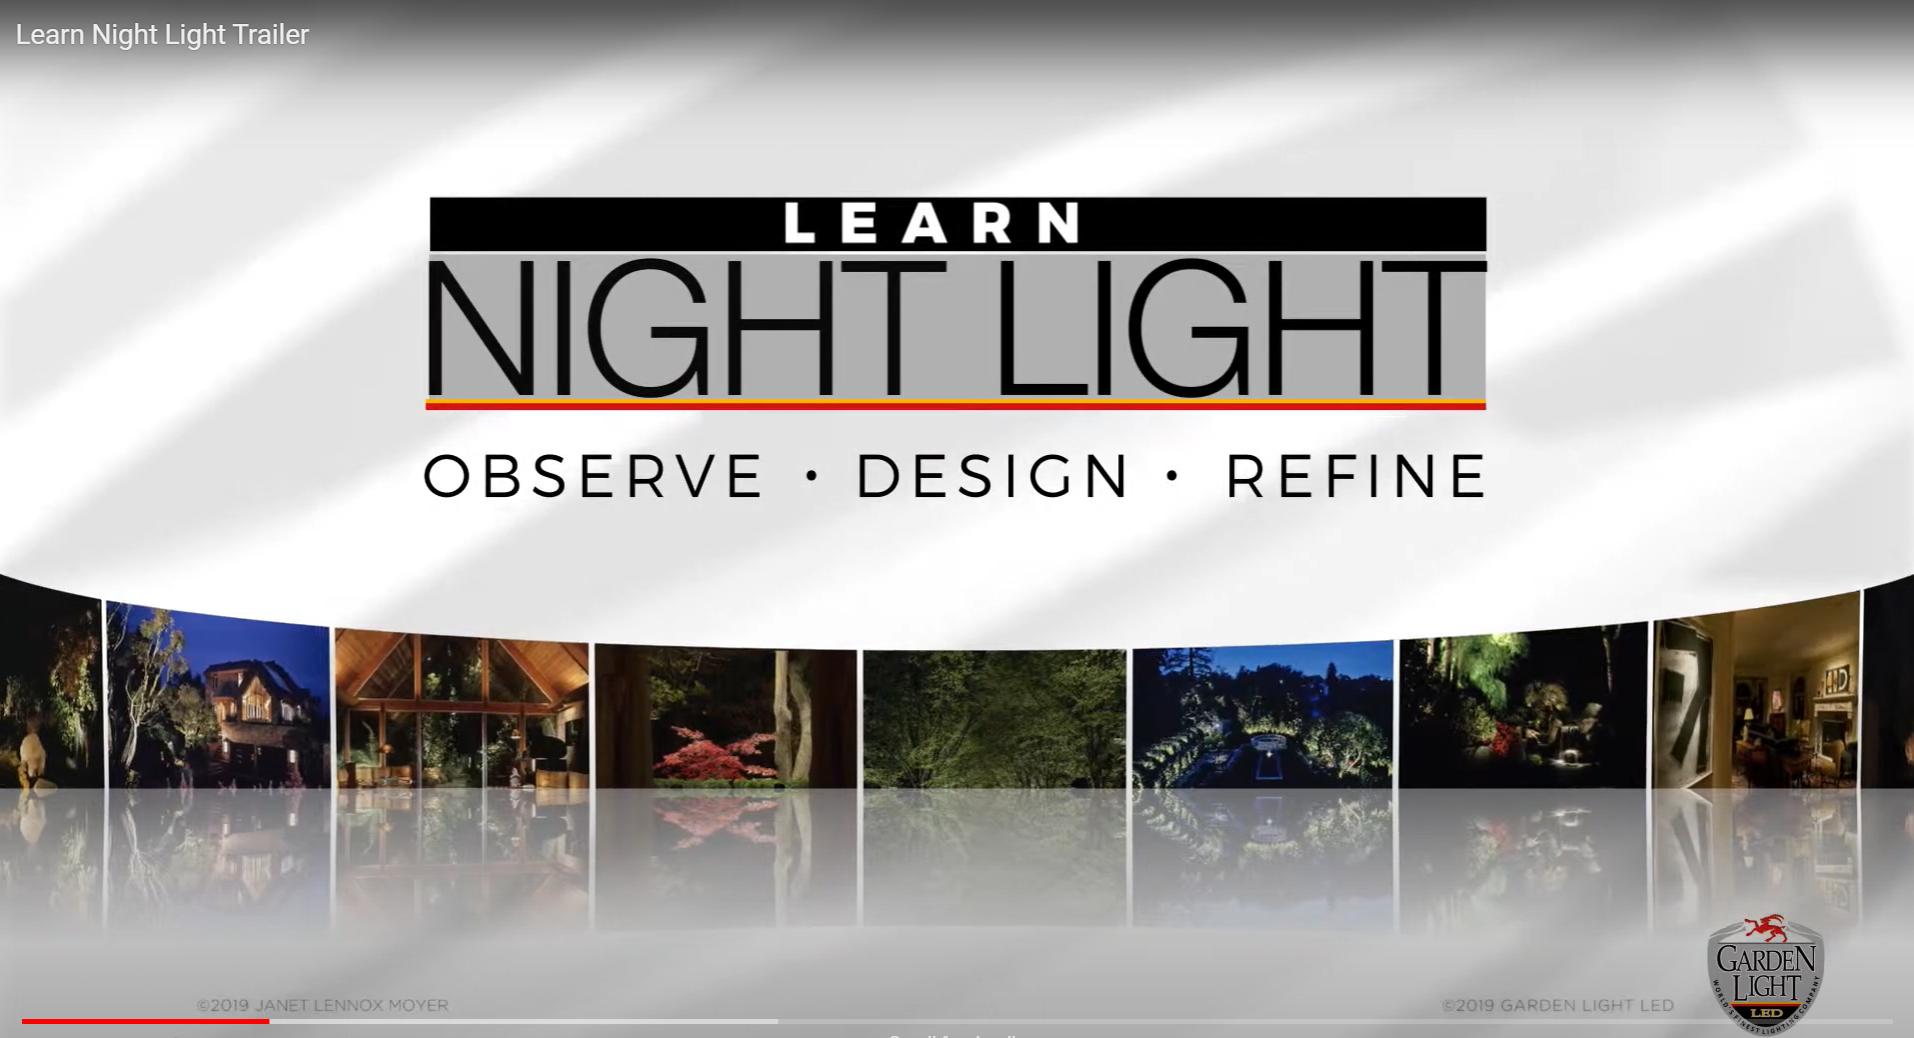 Learn more about Learn Night Light!